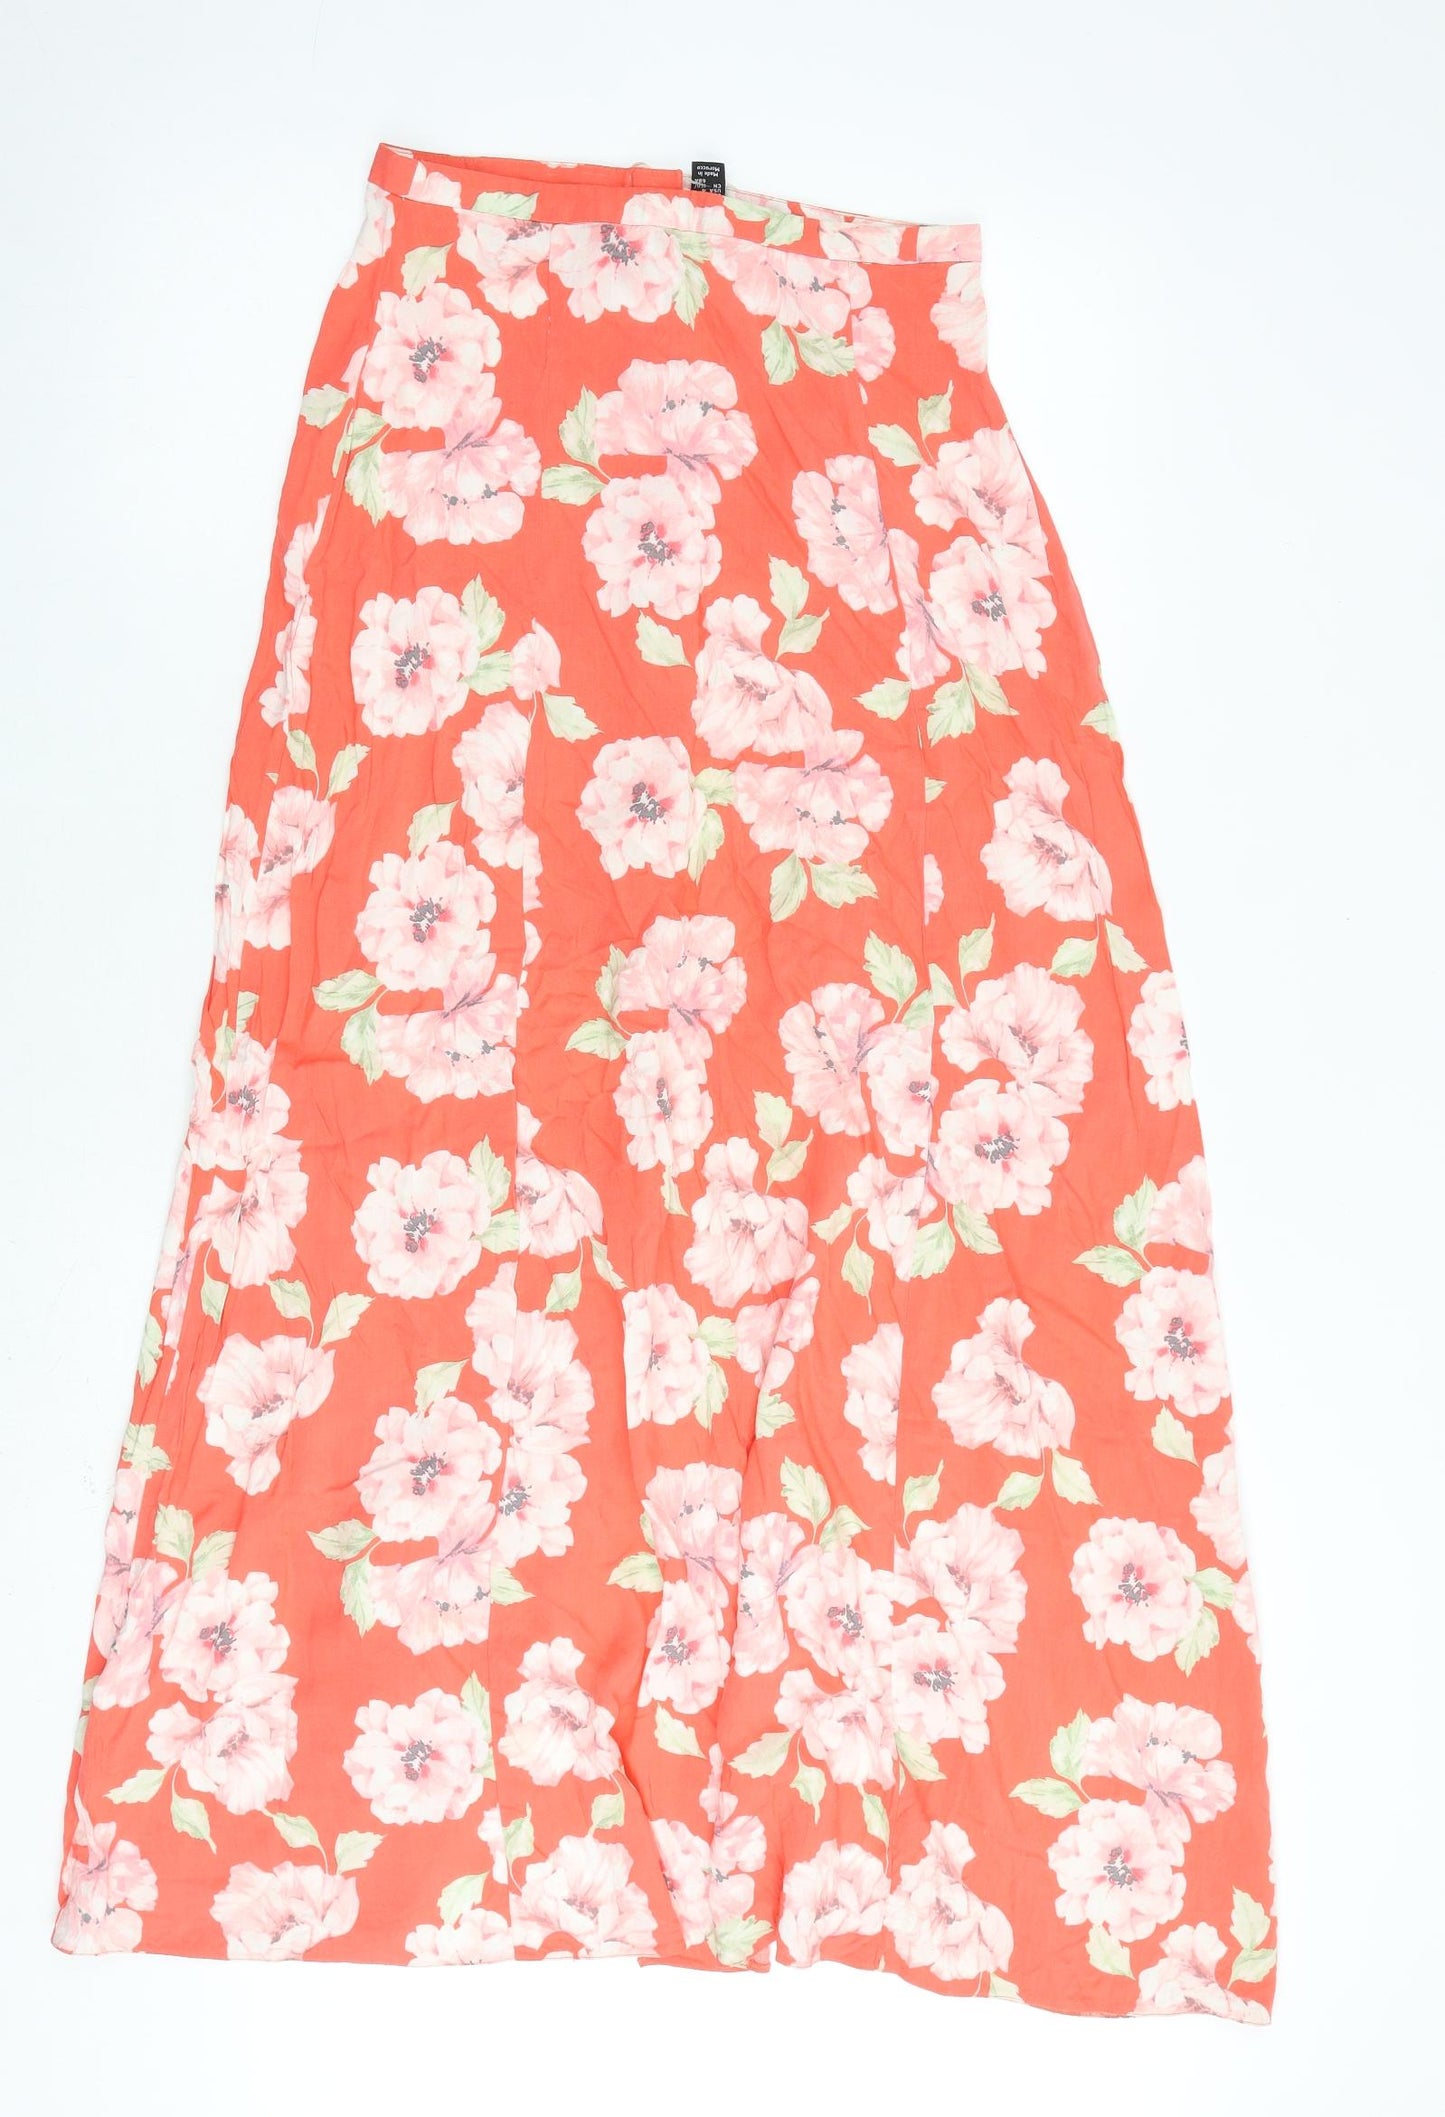 New Look Womens Pink Floral Viscose Swing Skirt Size 8 Button